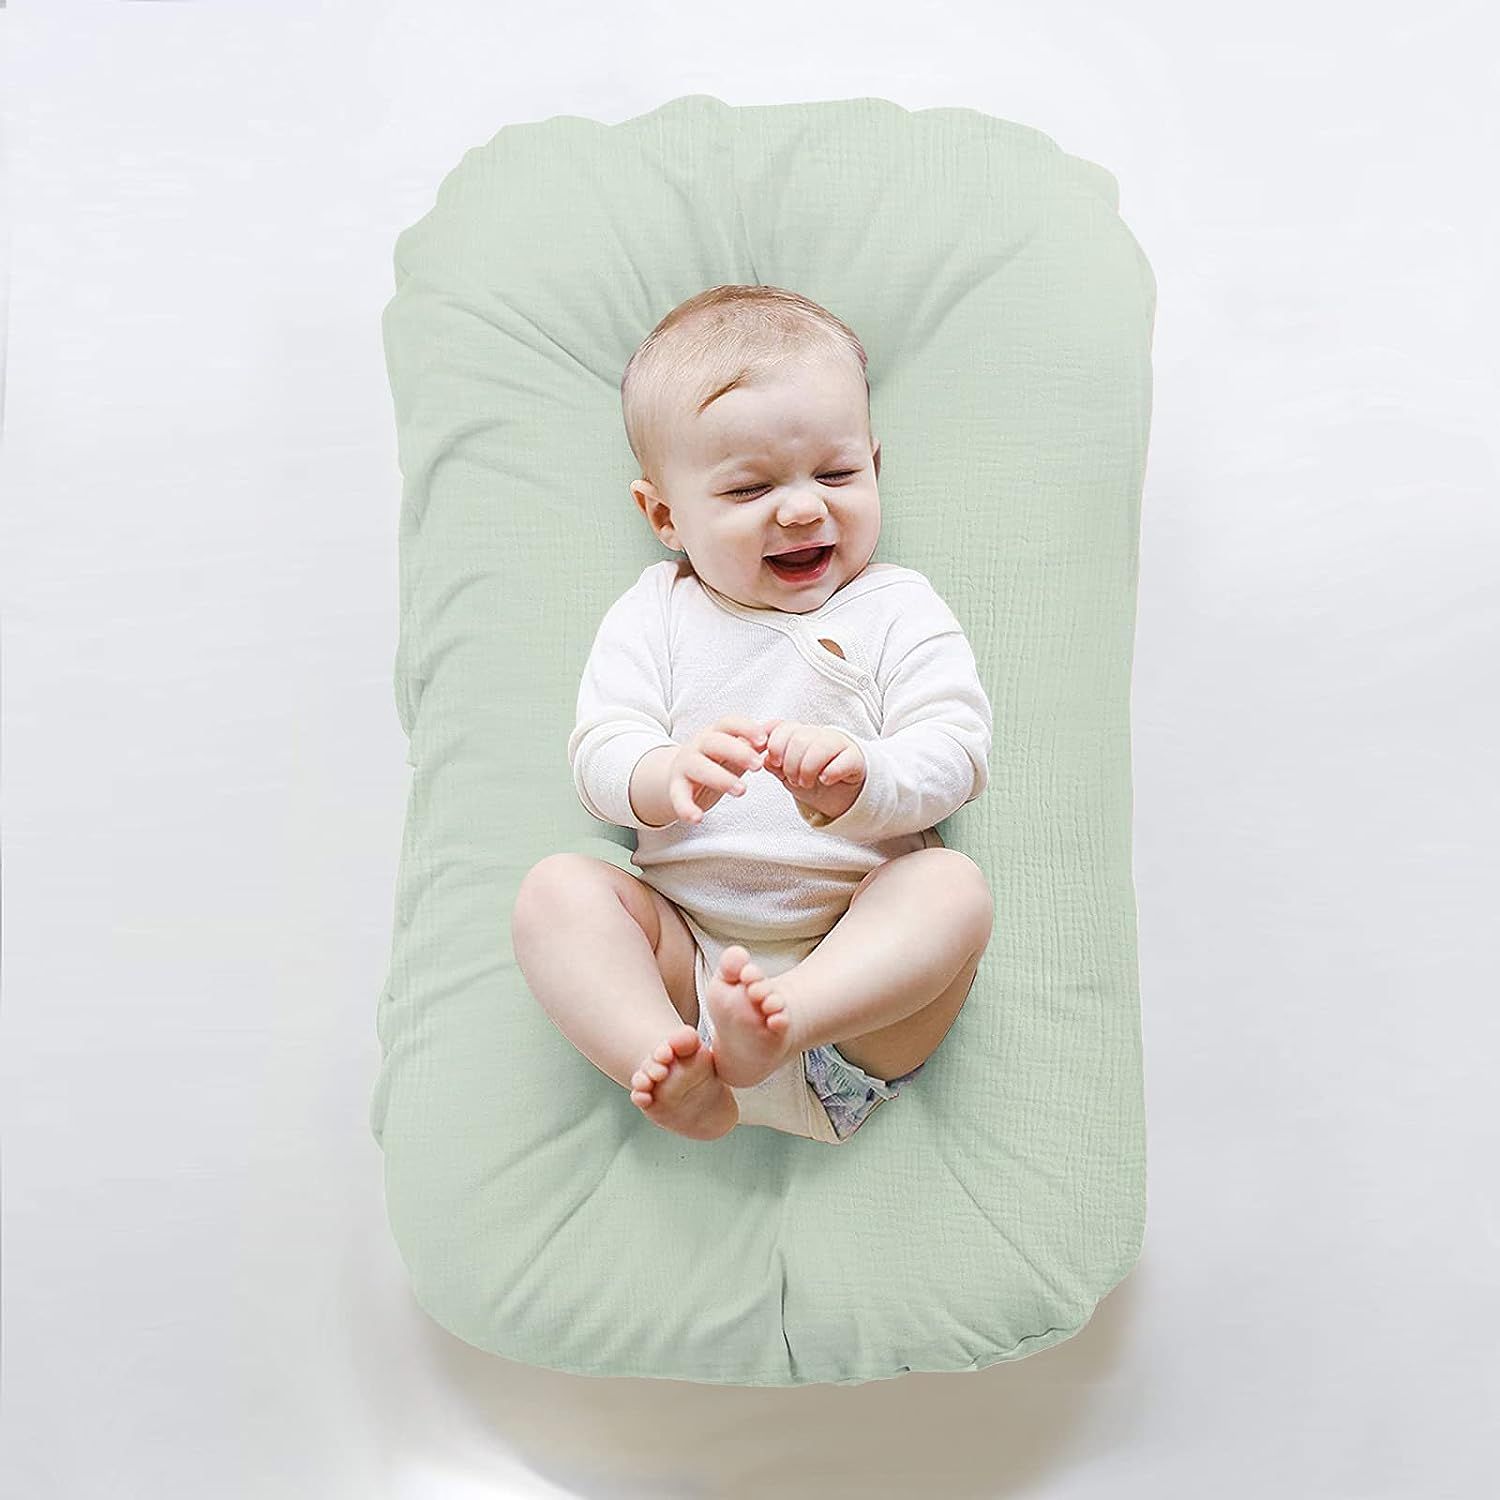 5 Top Baby Nests to Keep Your Little One Cozy